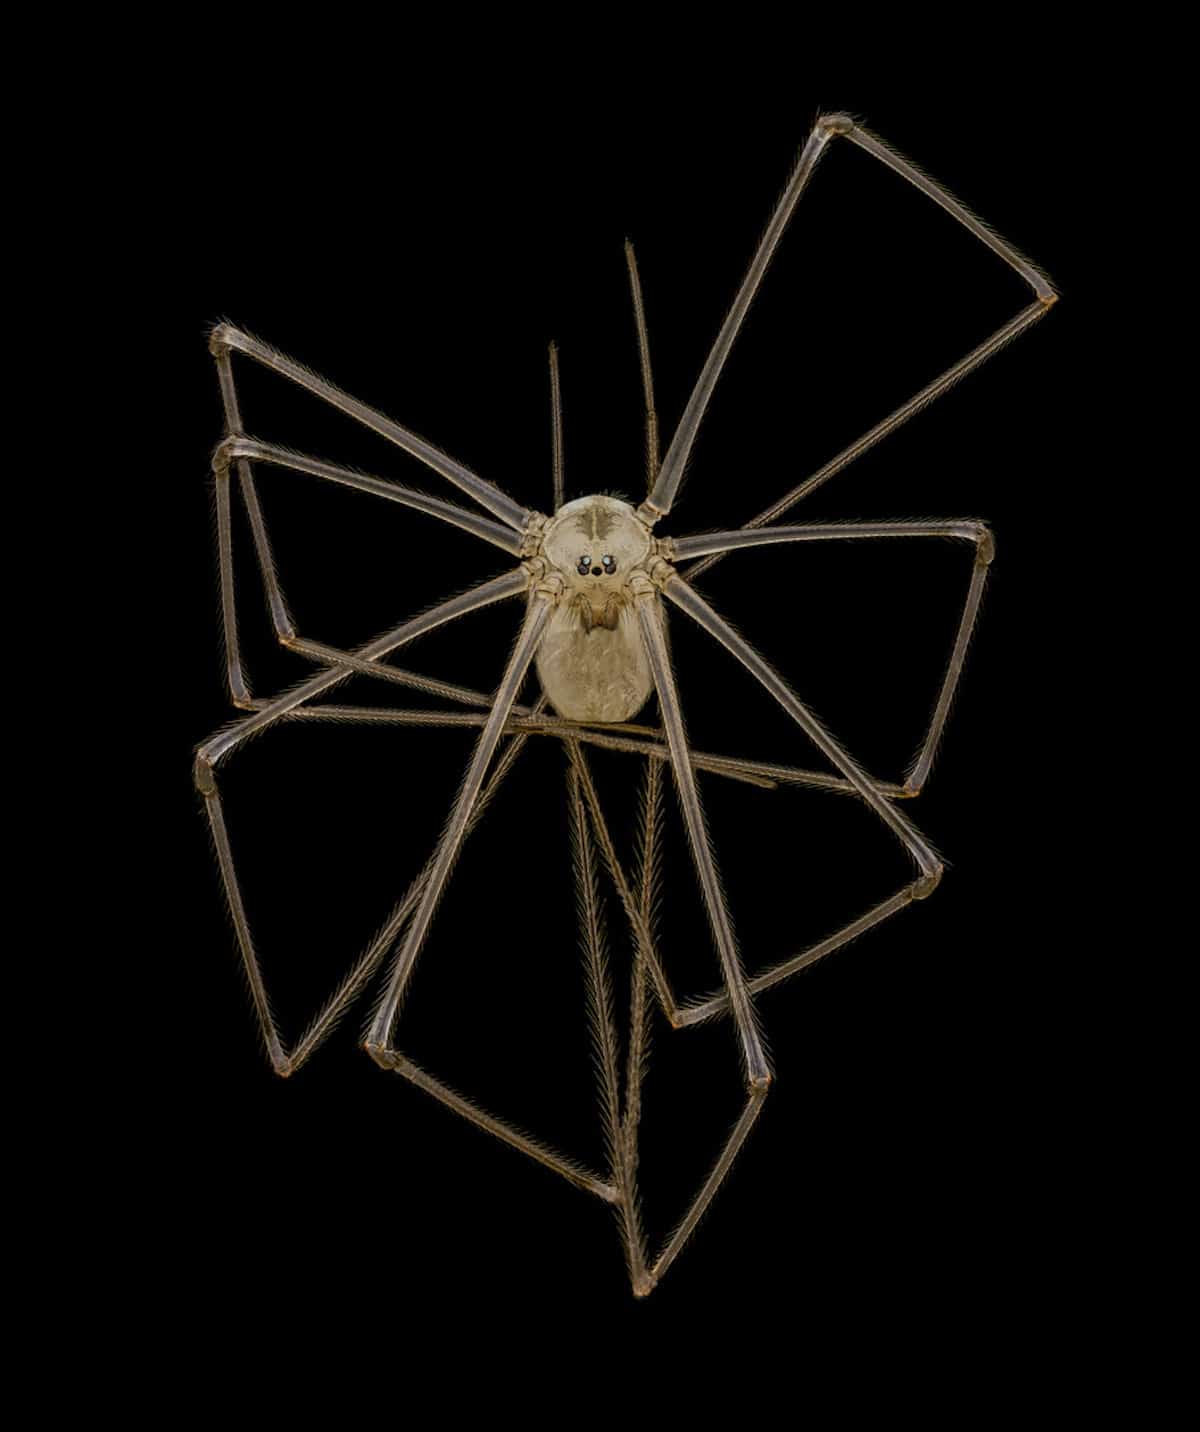 Long-bodied cellar/daddy long-legs spider